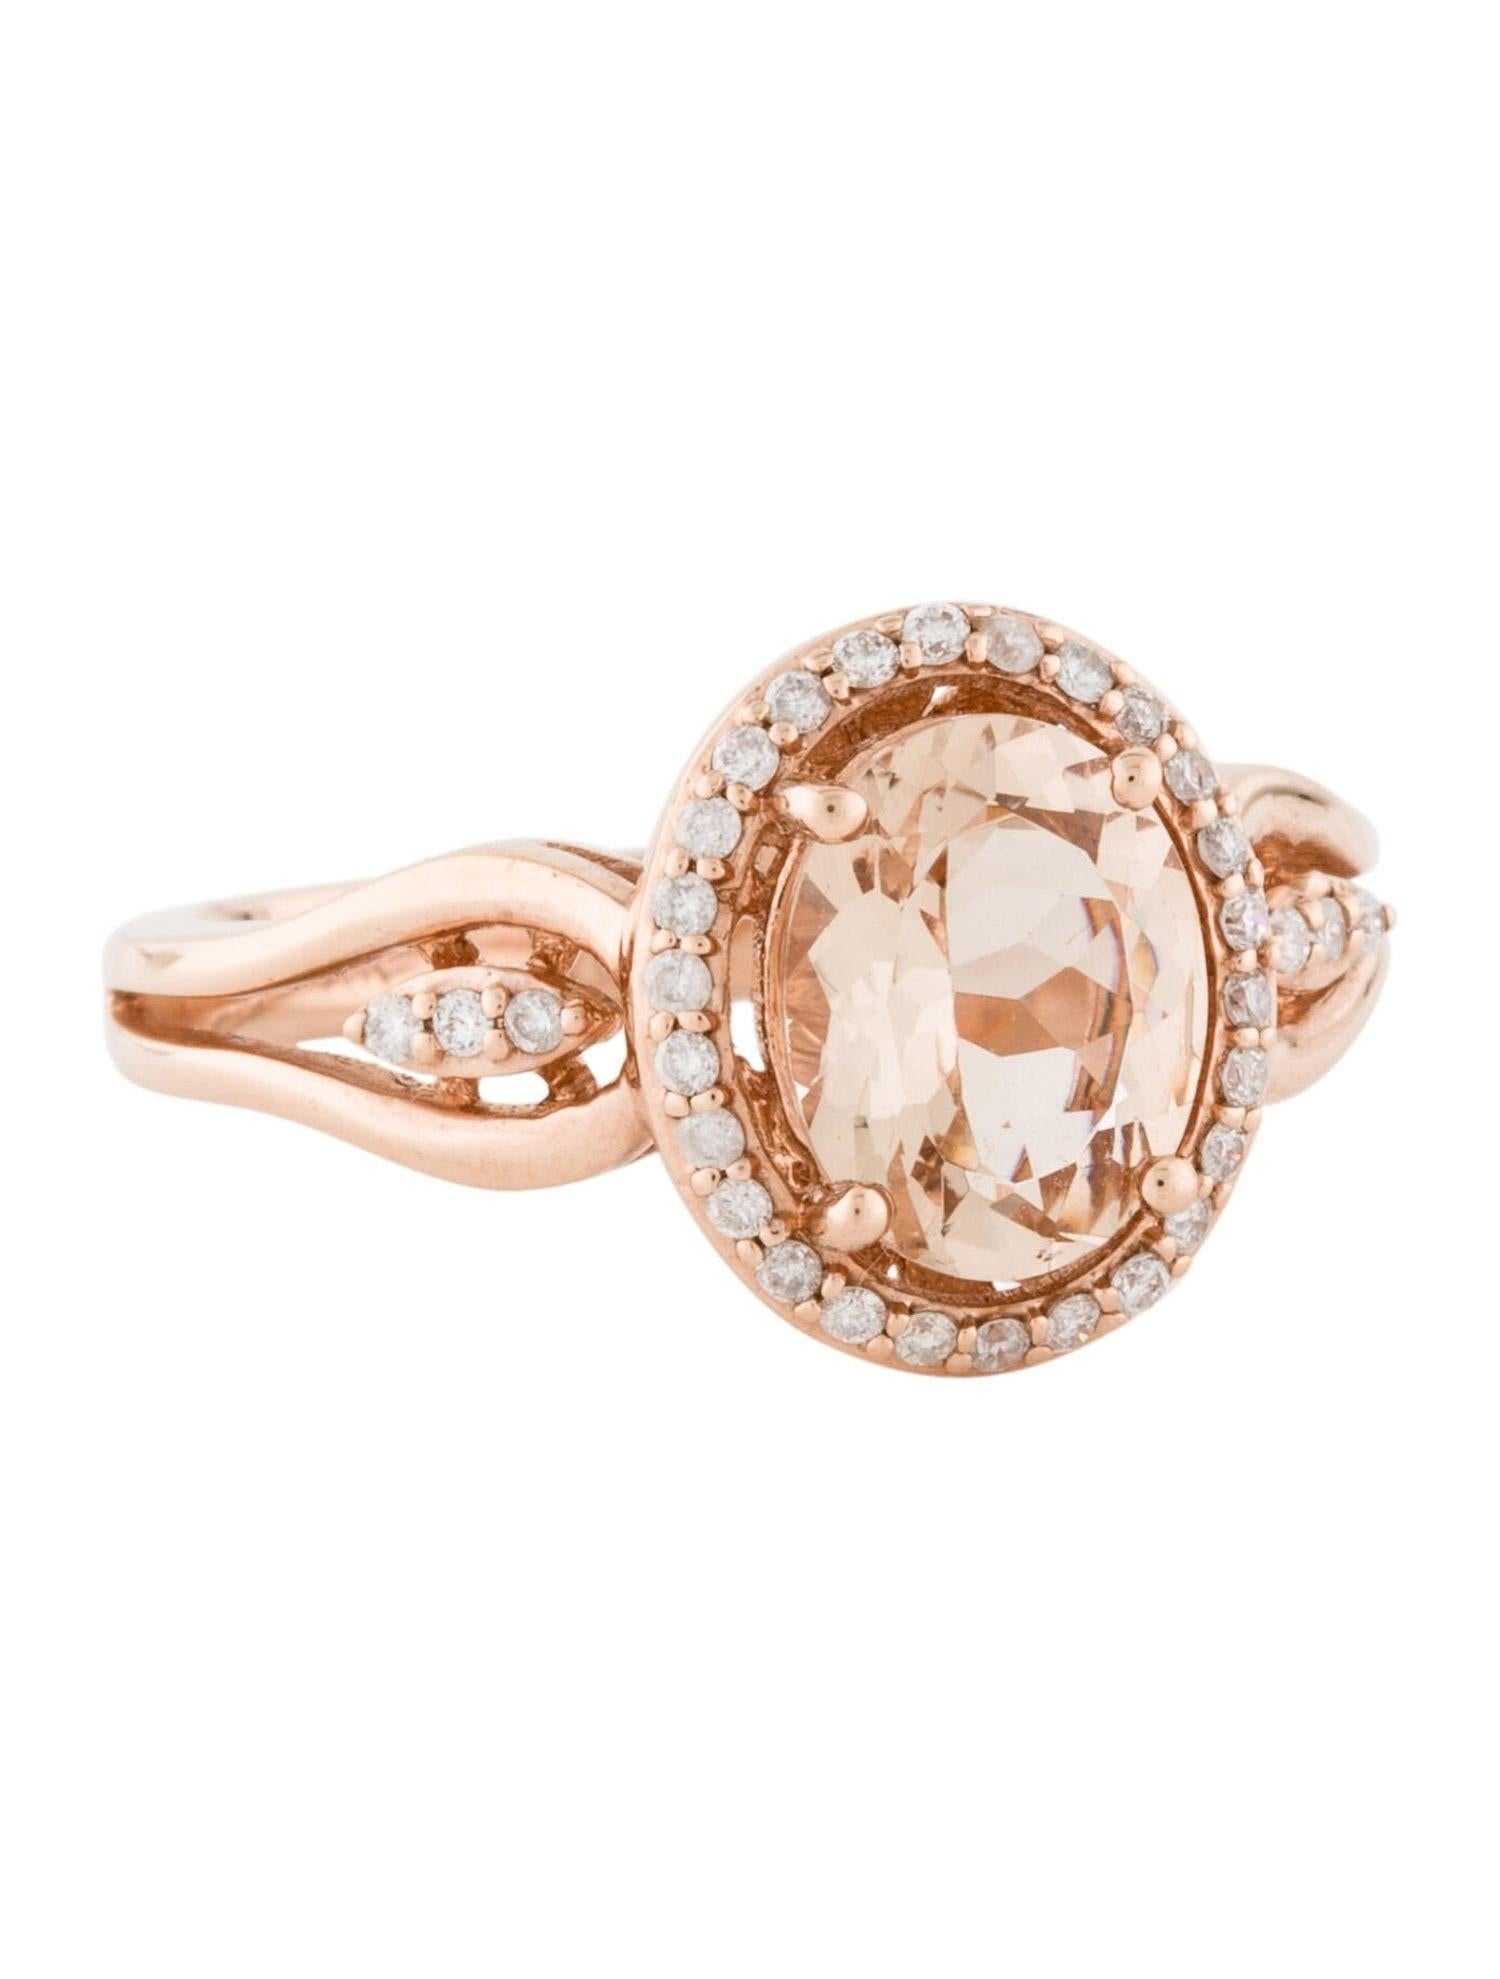 This is an alluring natural morganite and diamond ring set in solid 14K rose gold. The natural oval cut 1.54 Ct morganite has an excellent peachy pink color and is surrounded by Oval cut white diamonds. The ring is stamped 14K and is a true